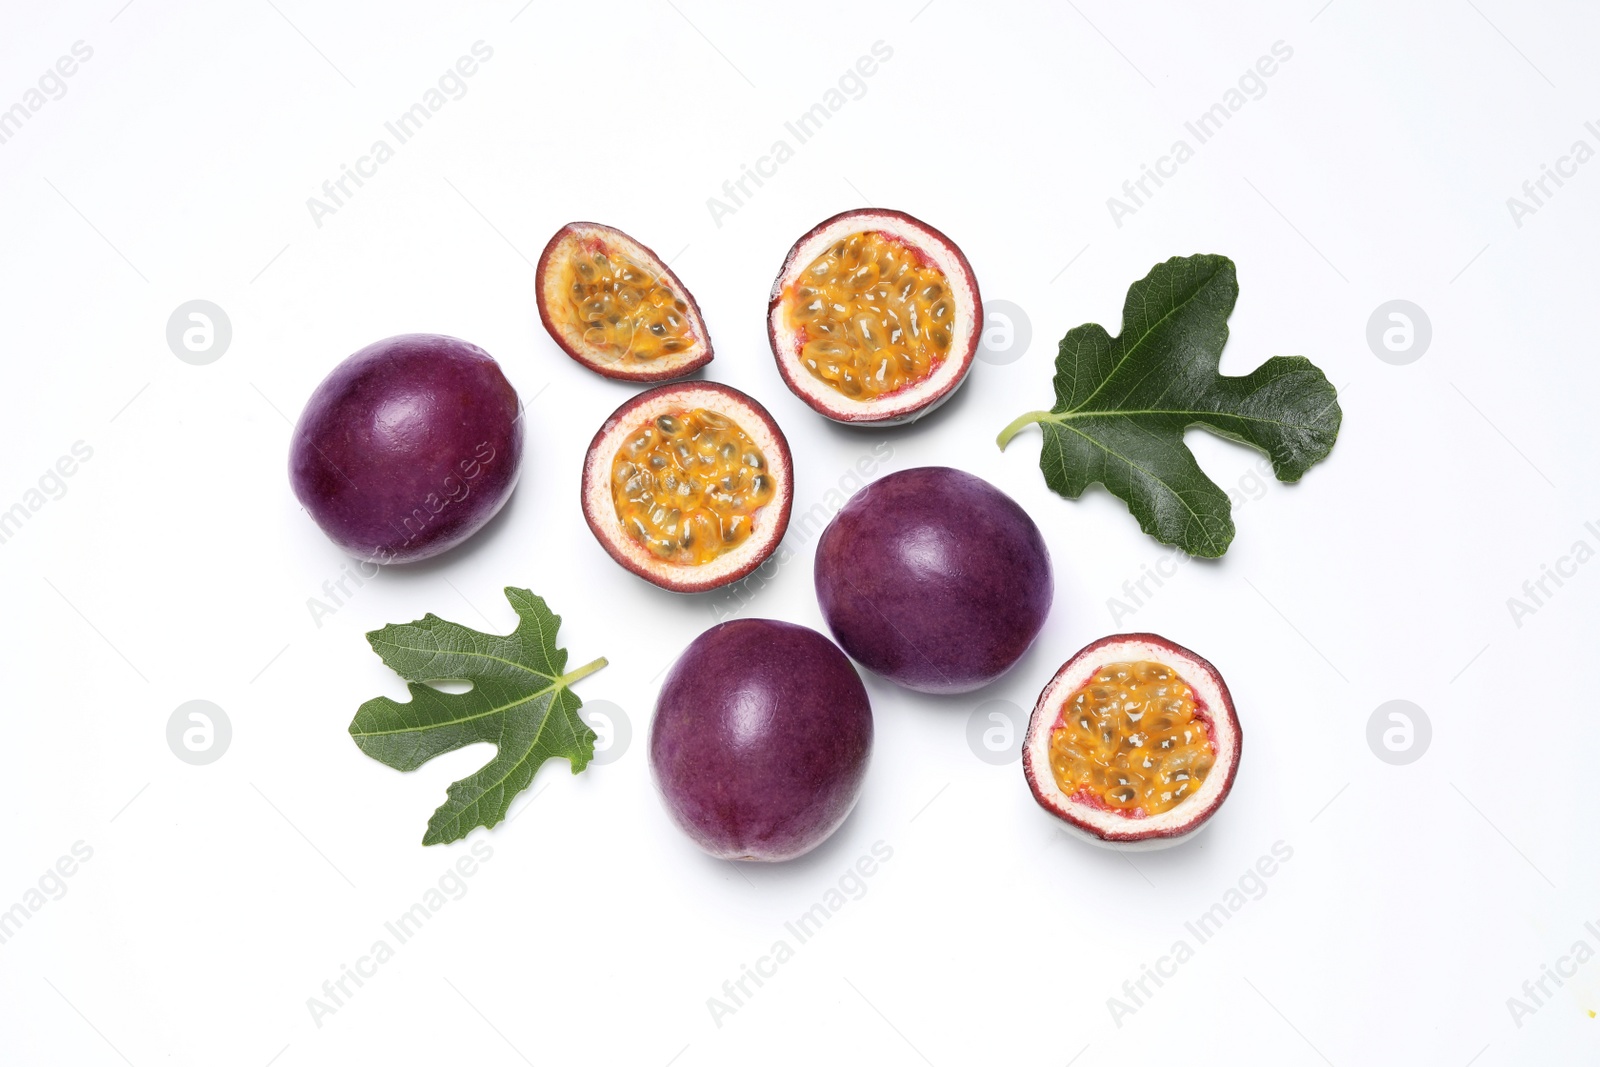 Photo of Fresh ripe passion fruits (maracuyas) with leaves on white background, flat lay